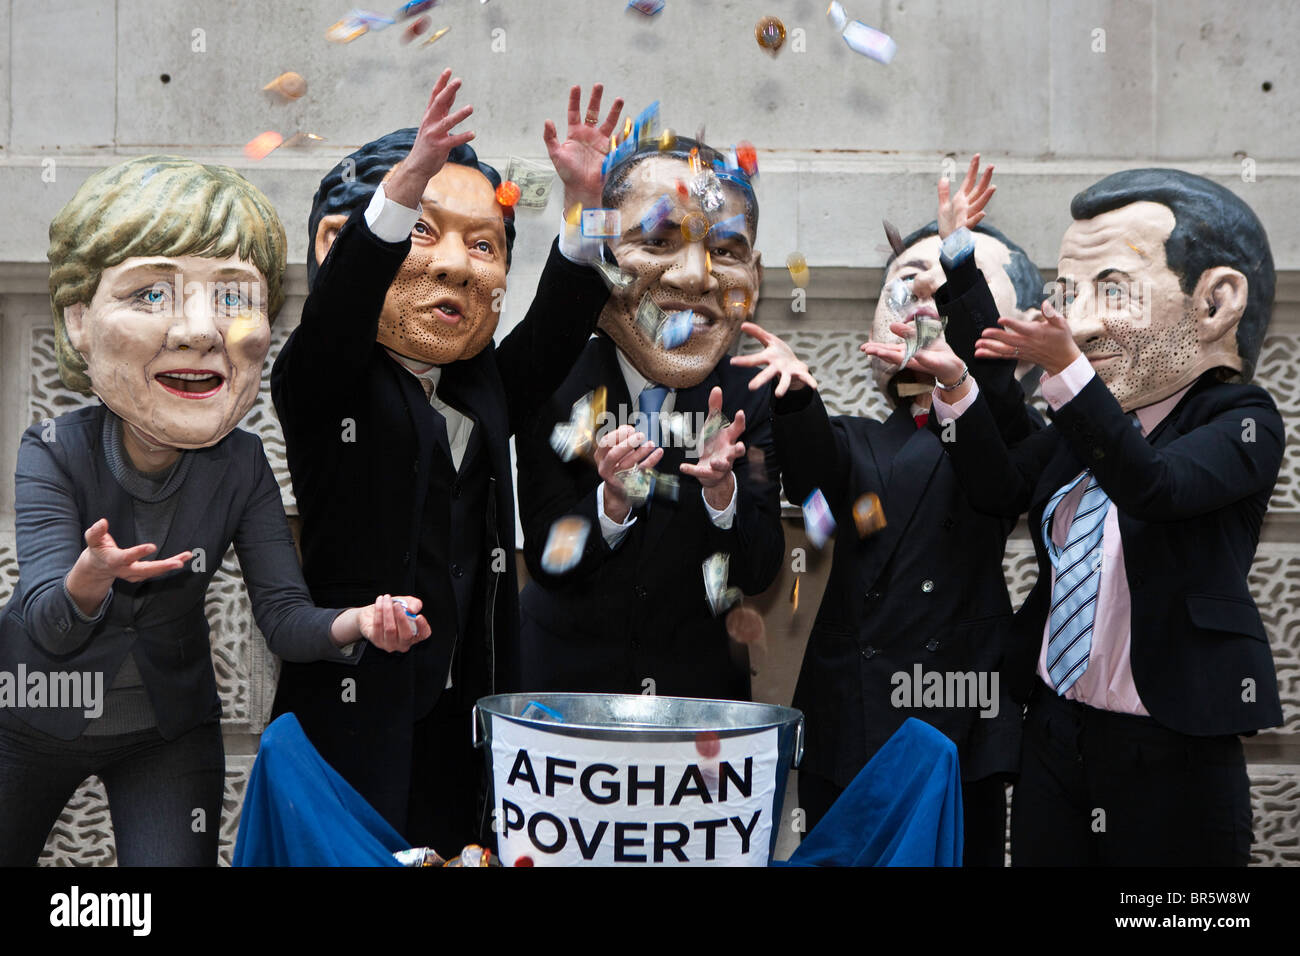 Protestors wearing masks and dressed as the big world leaders 'throwing money at poverty in Afghanistan'. Stock Photo